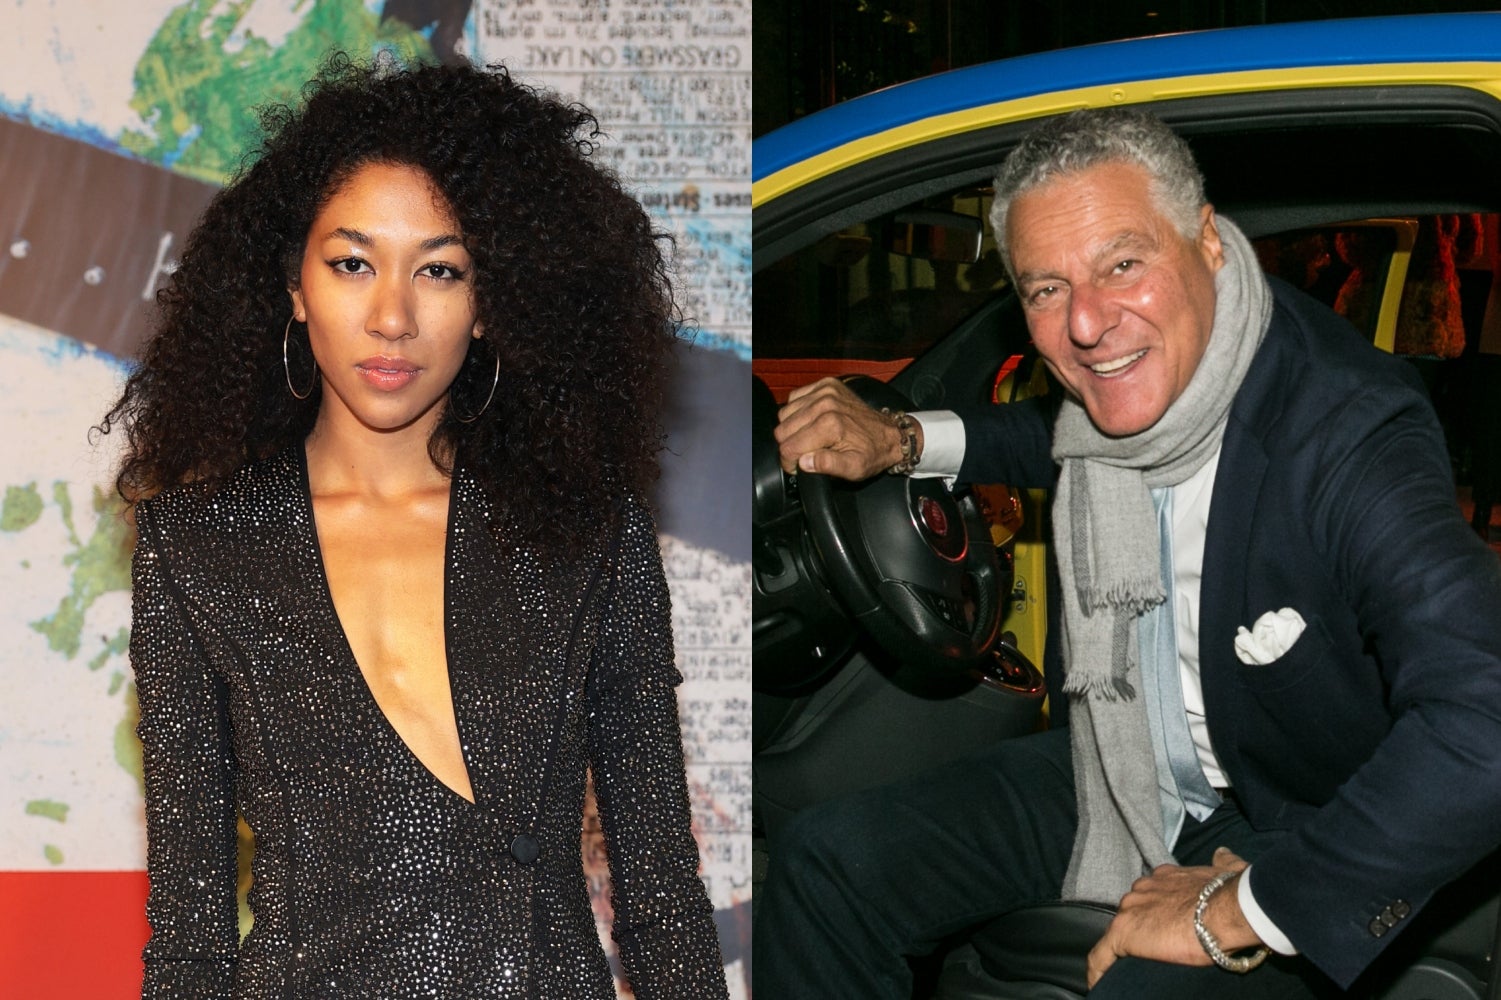 Aoki Lee Simmons, 21, Responds After Photos Of Her Kissing 65-Year-Old Restaurateur Go Viral